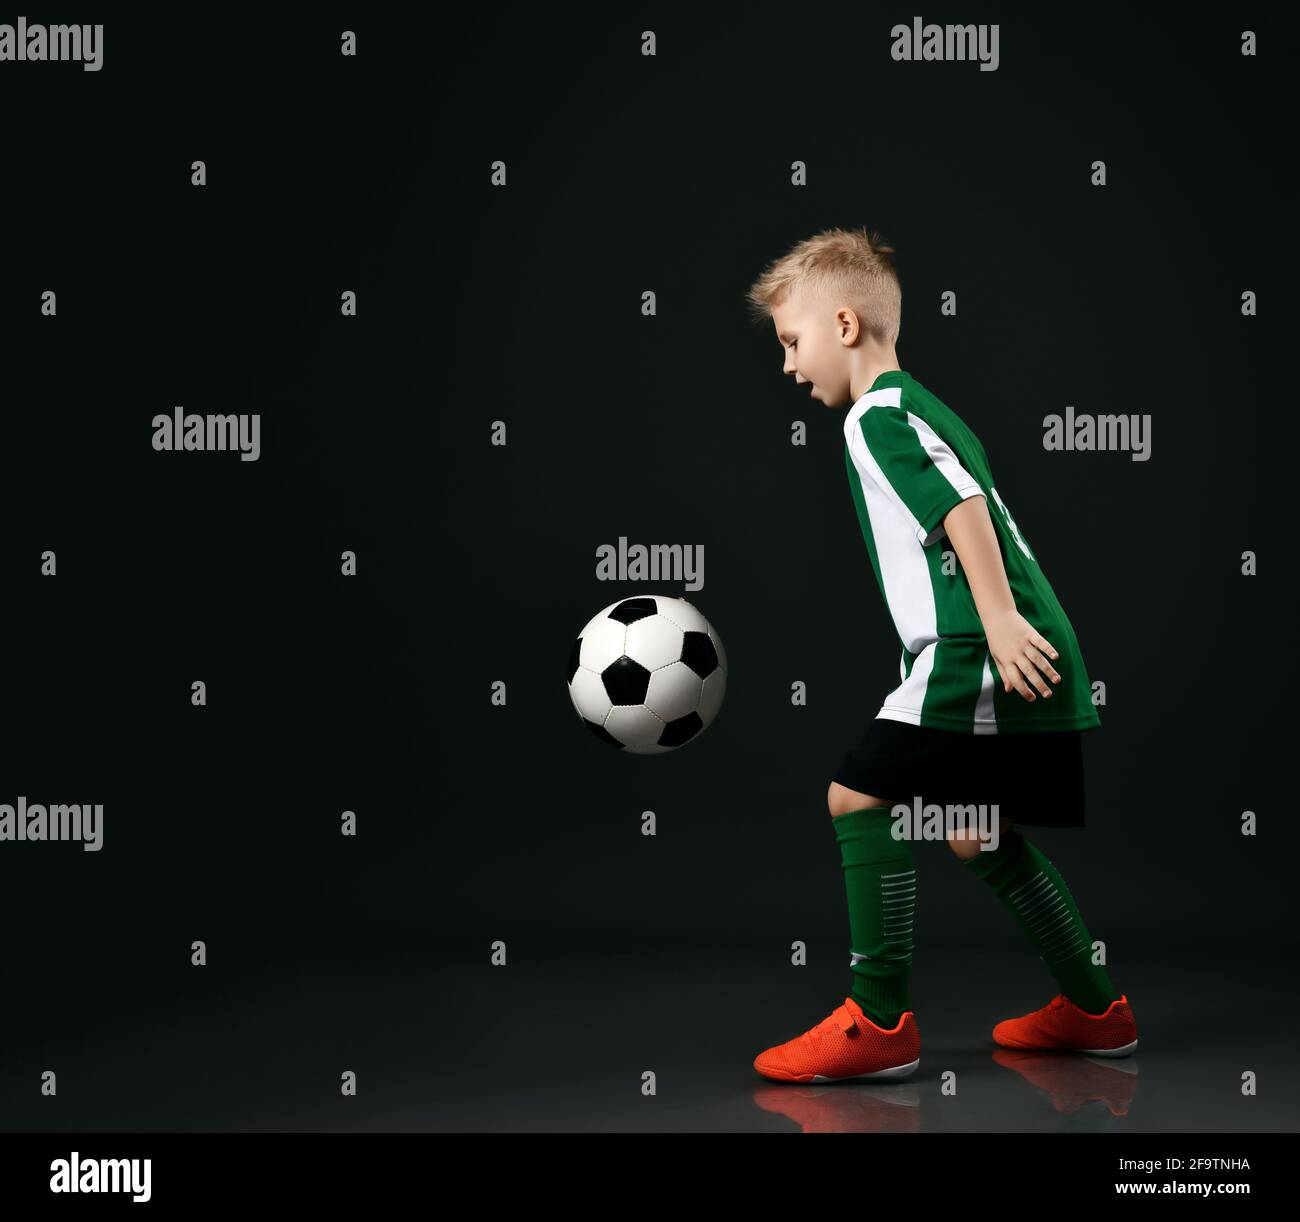 Active sporty schoolboy in soccer player uniform plays with ball, going to kick and scoring a goal Stock Photo